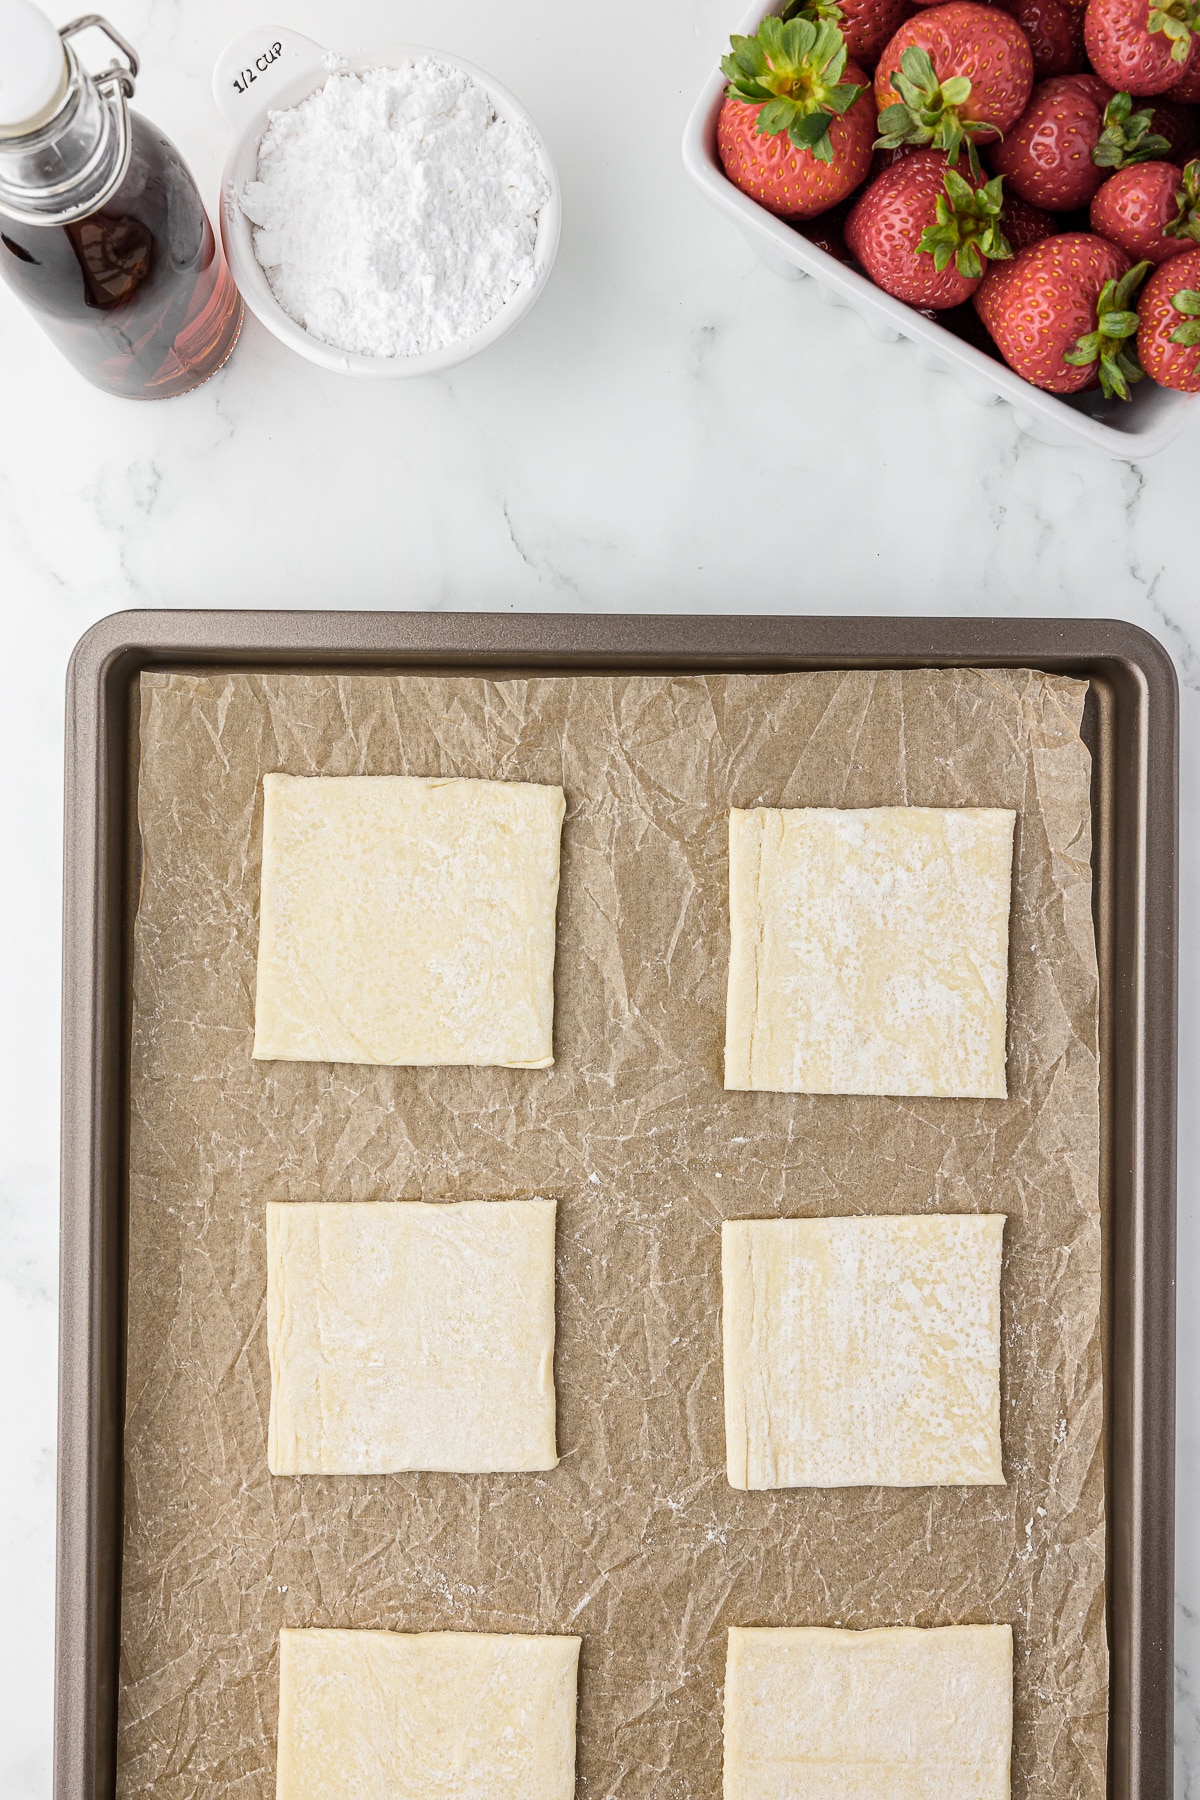 Puff pastry squares on a baking sheet with parchment paper